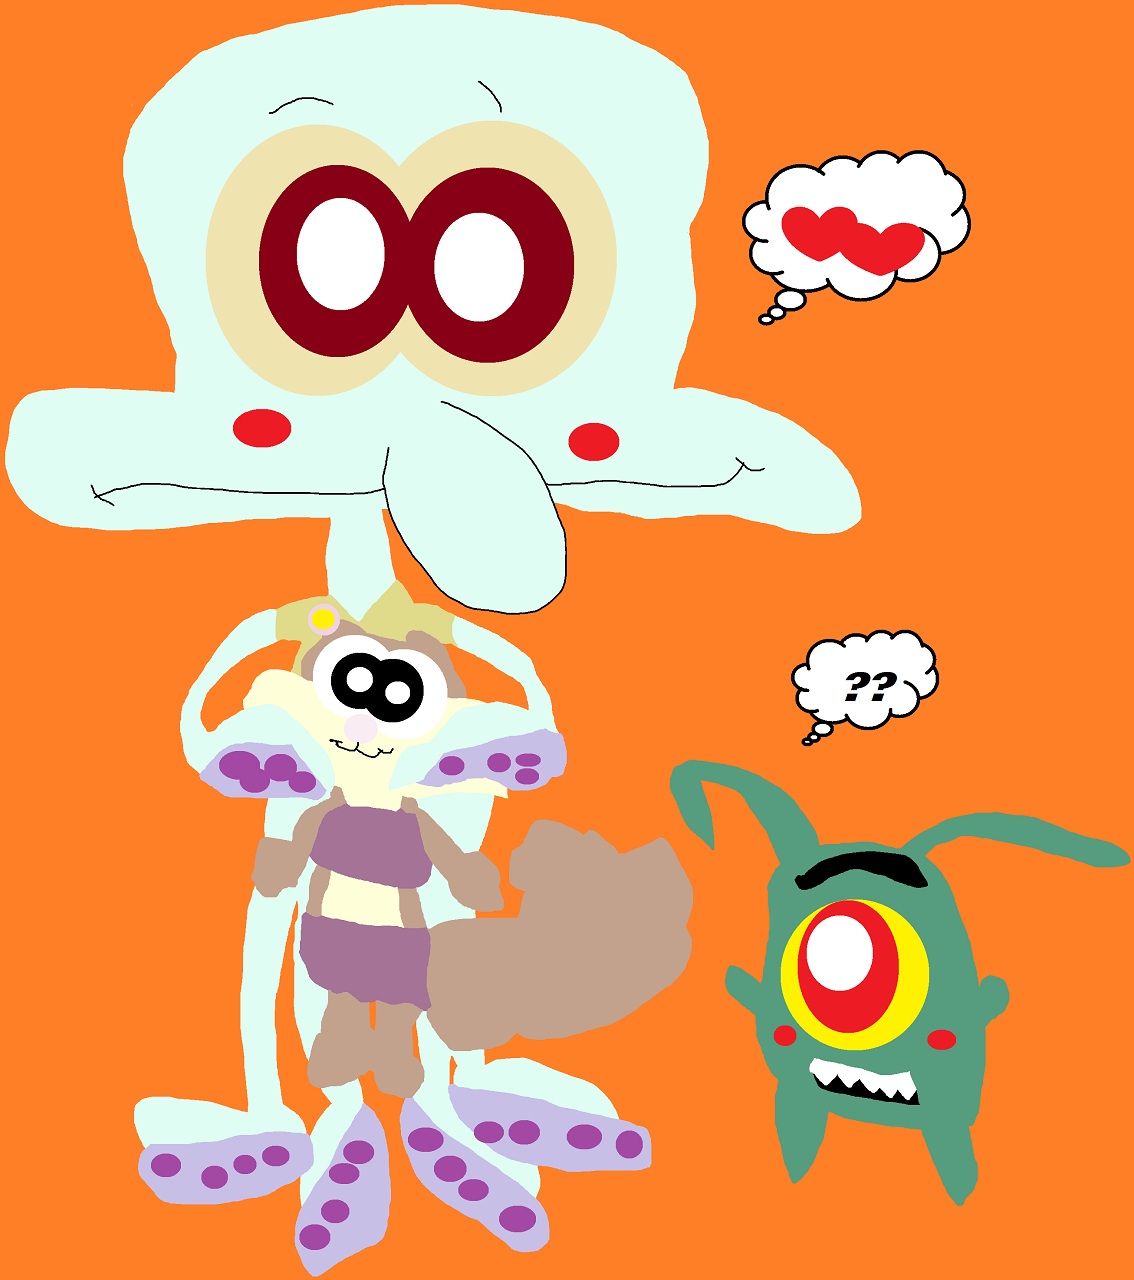 Plankton Is Confused About Why Squdiward Has A Sandy Plush by Falconlobo